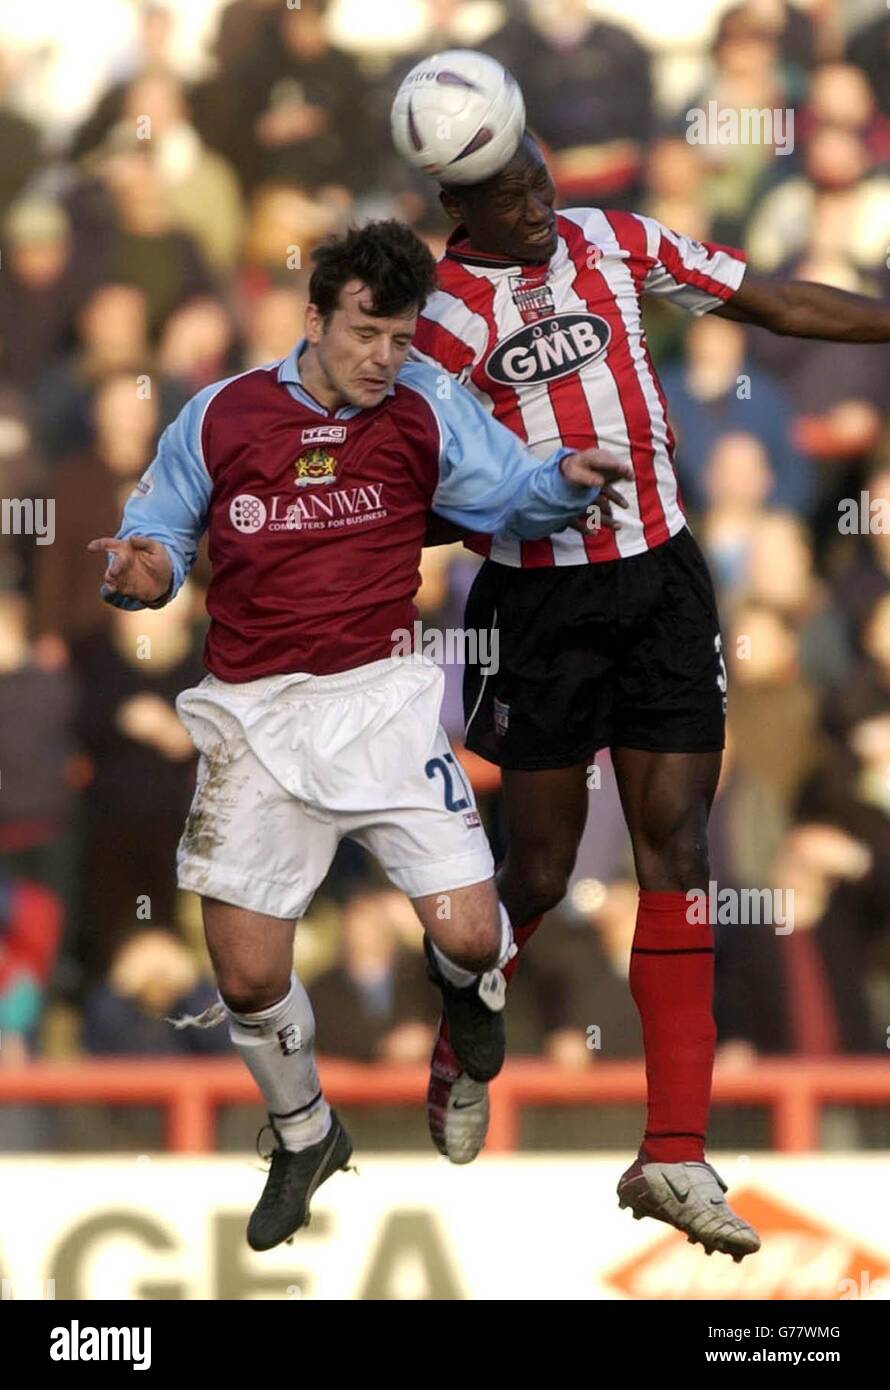 Burnley's Robbie Blake (L) challenges Brentford's Ibrahima Sonko during their FA Cup Fourth round match at Brentford's Griffin Park ground. NO UNOFFICIAL CLUB WEBSITE USE. Stock Photo